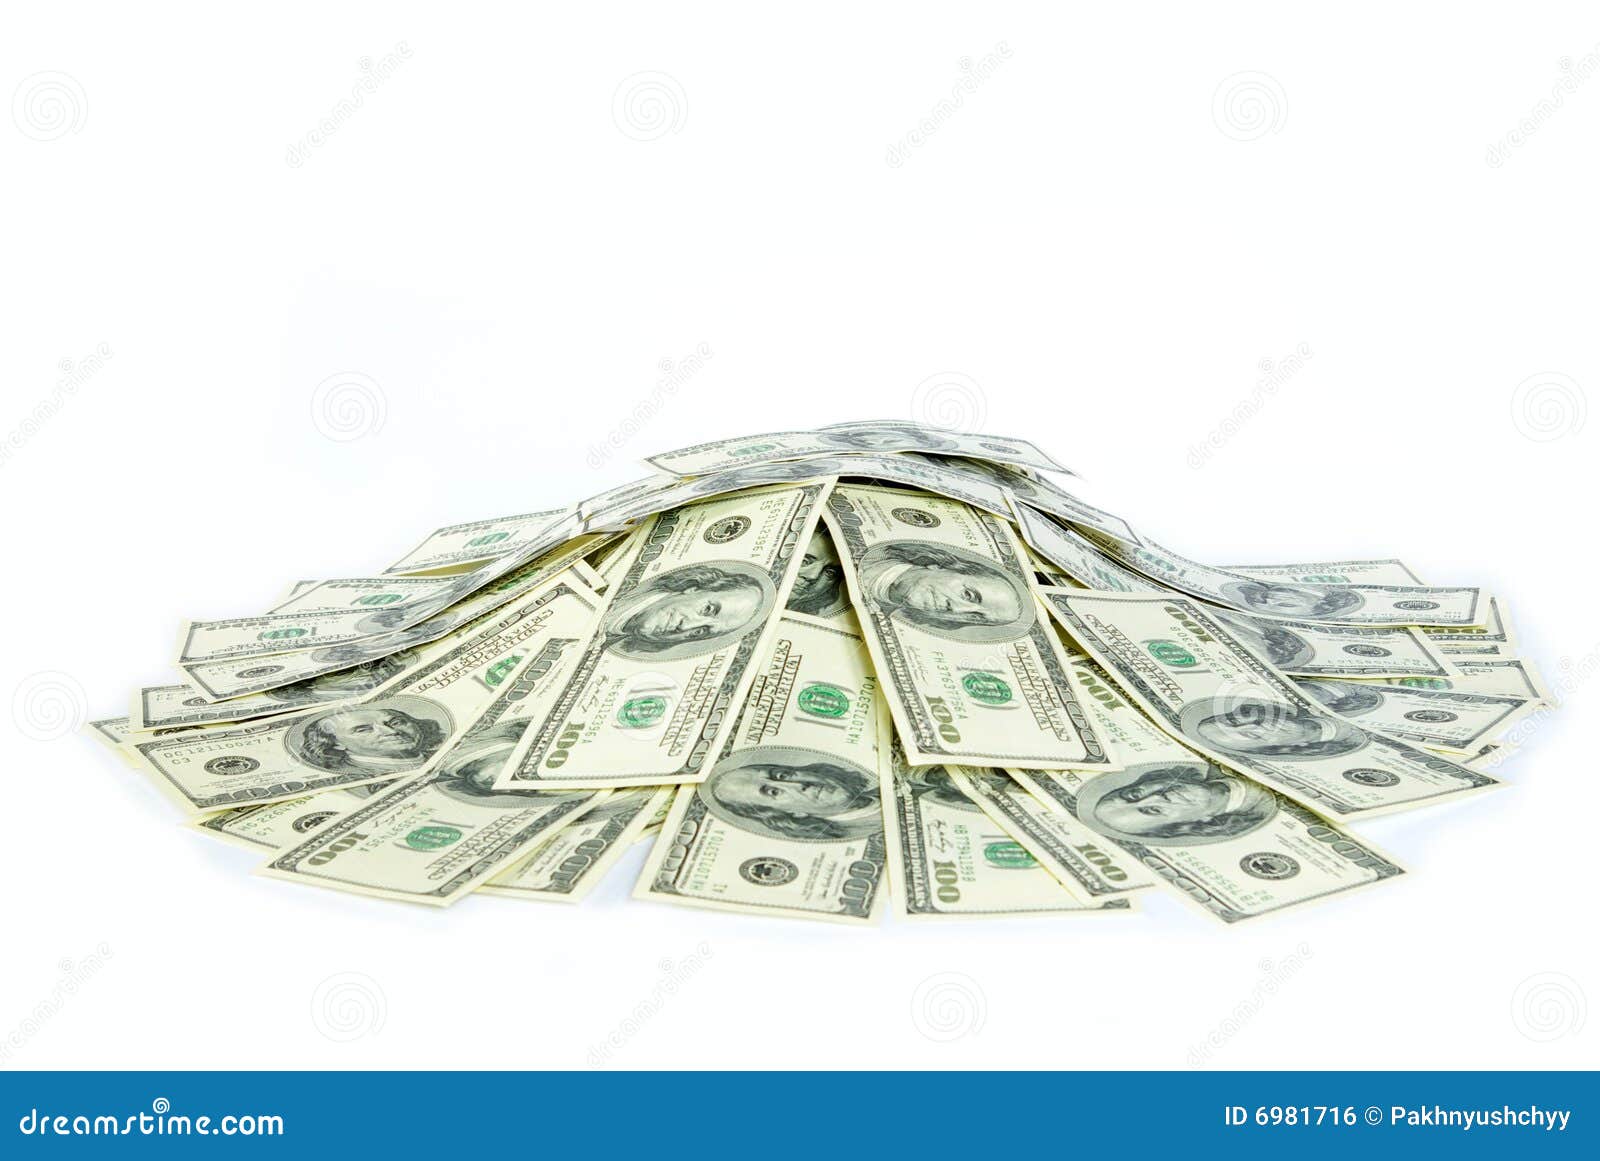 free clipart pile of money - photo #33